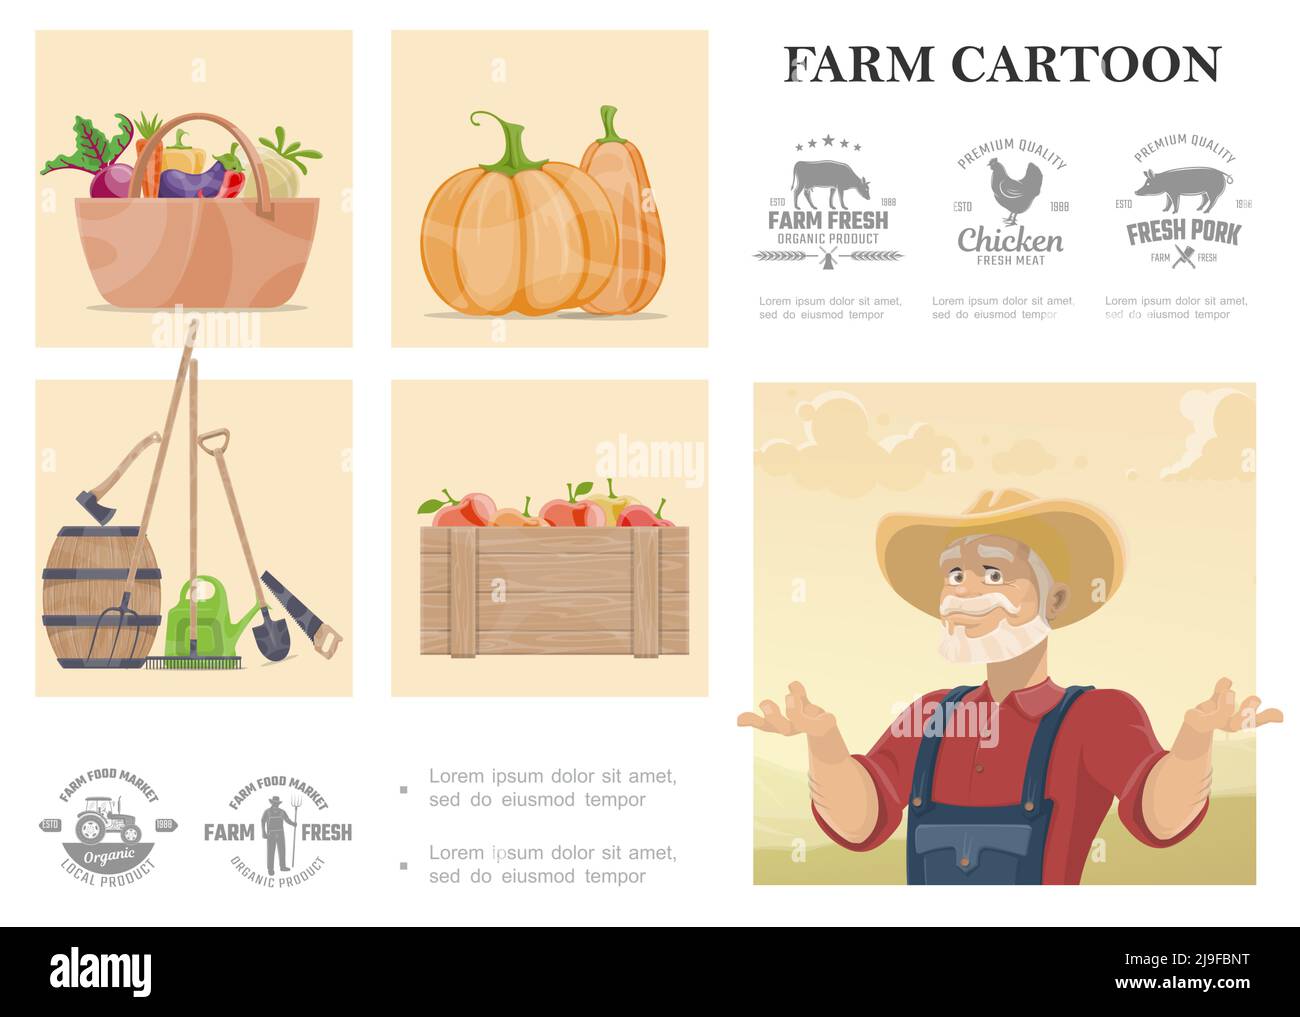 Cartoon farming and agriculture composition with farmer manual labor tools vegetables apples and farm monochrome design emblems vector illustration Stock Vector